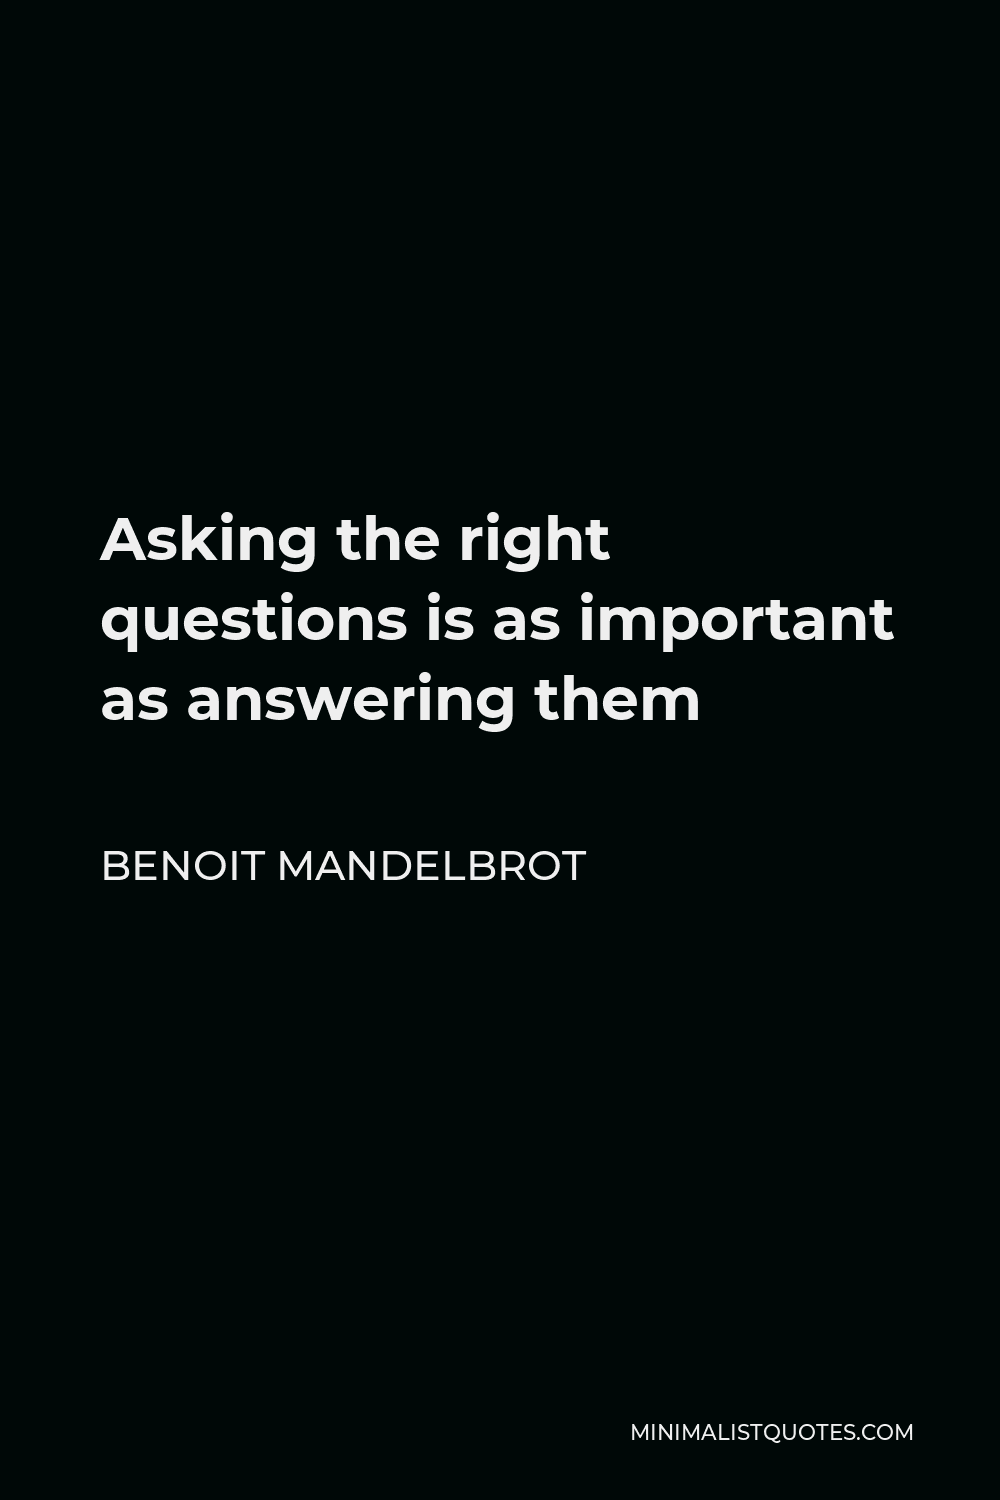 Benoit Mandelbrot Quote - Asking the right questions is as important as answering them